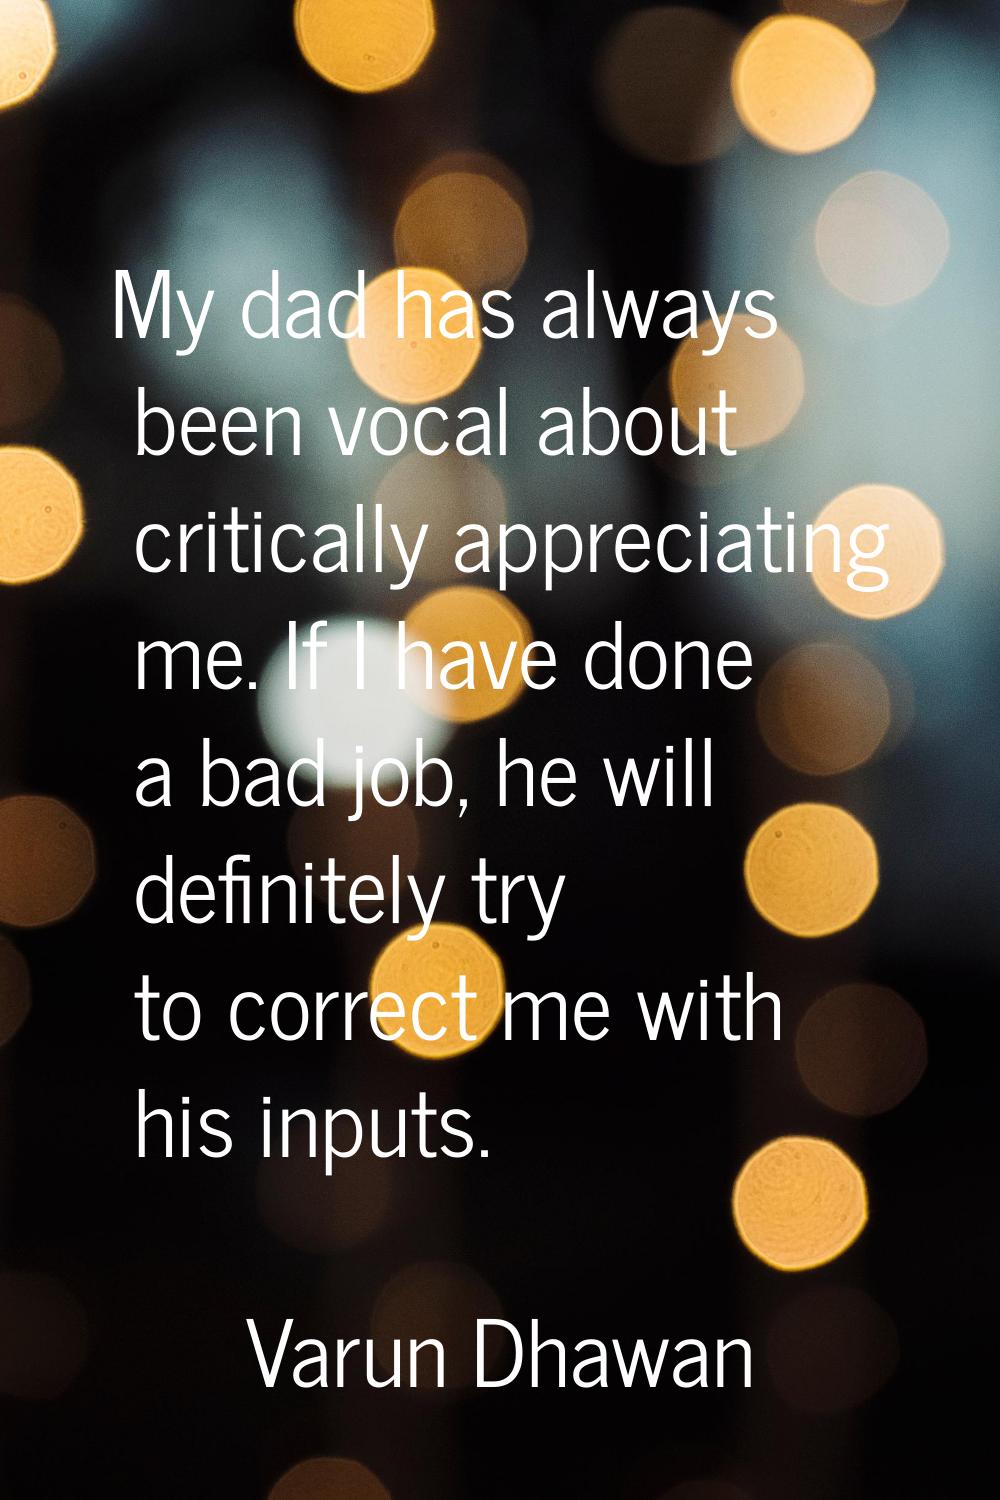 My dad has always been vocal about critically appreciating me. If I have done a bad job, he will de